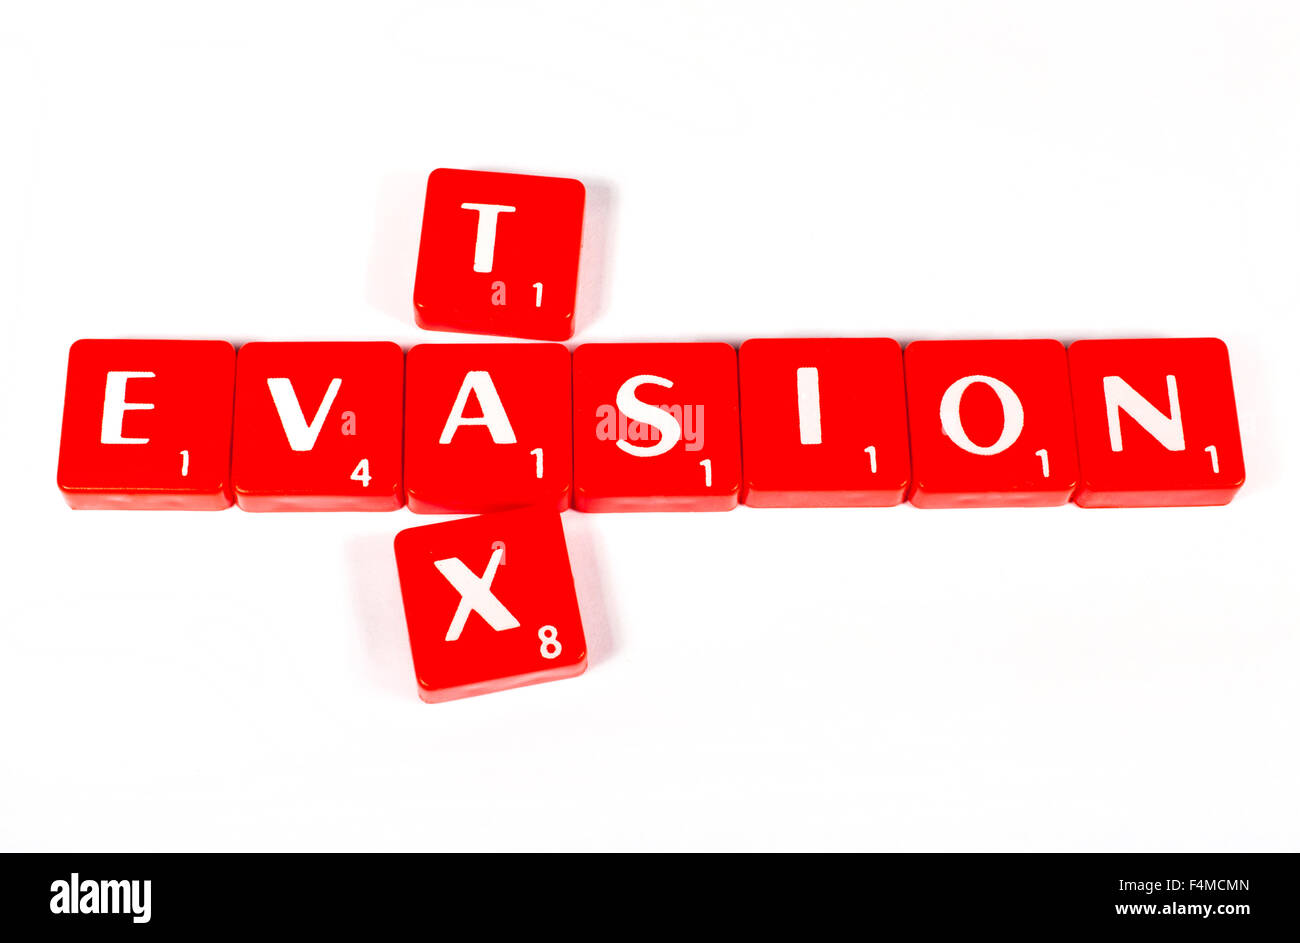 TAX EVASION spelt out in red lettered tiles. Stock Photo